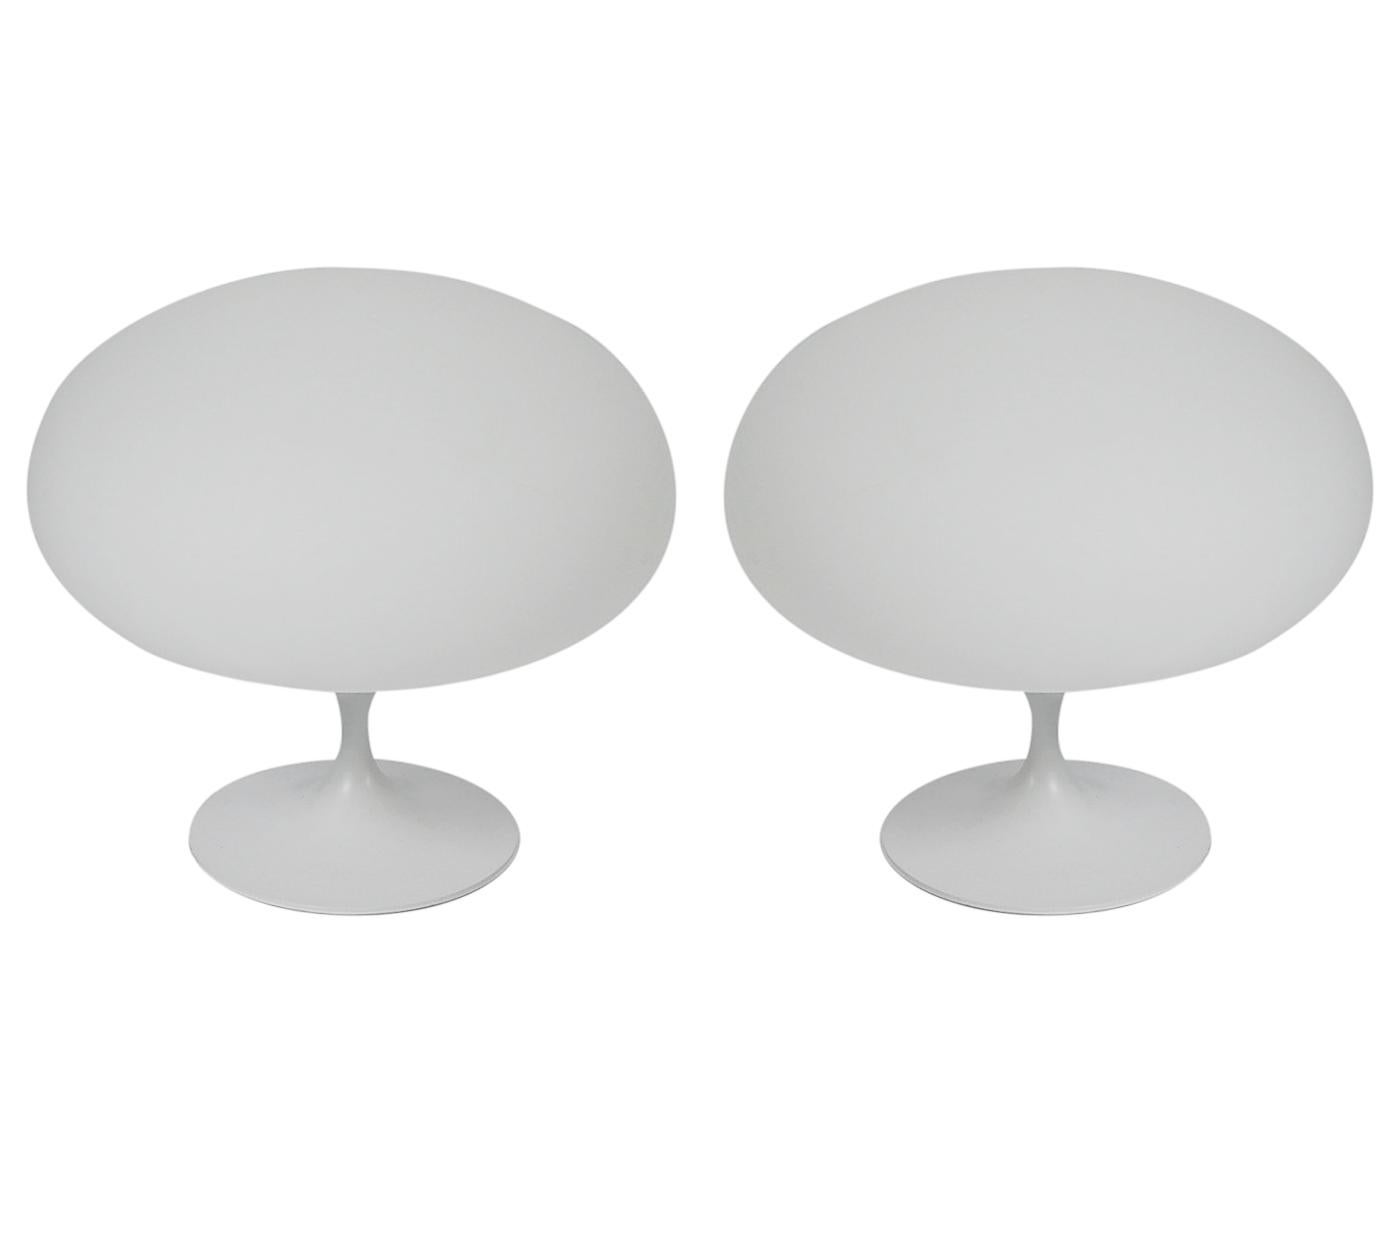 Mid-Century Modern Pair of Mid-Century Tulip Table Lamps by Designline in White on White Glass For Sale